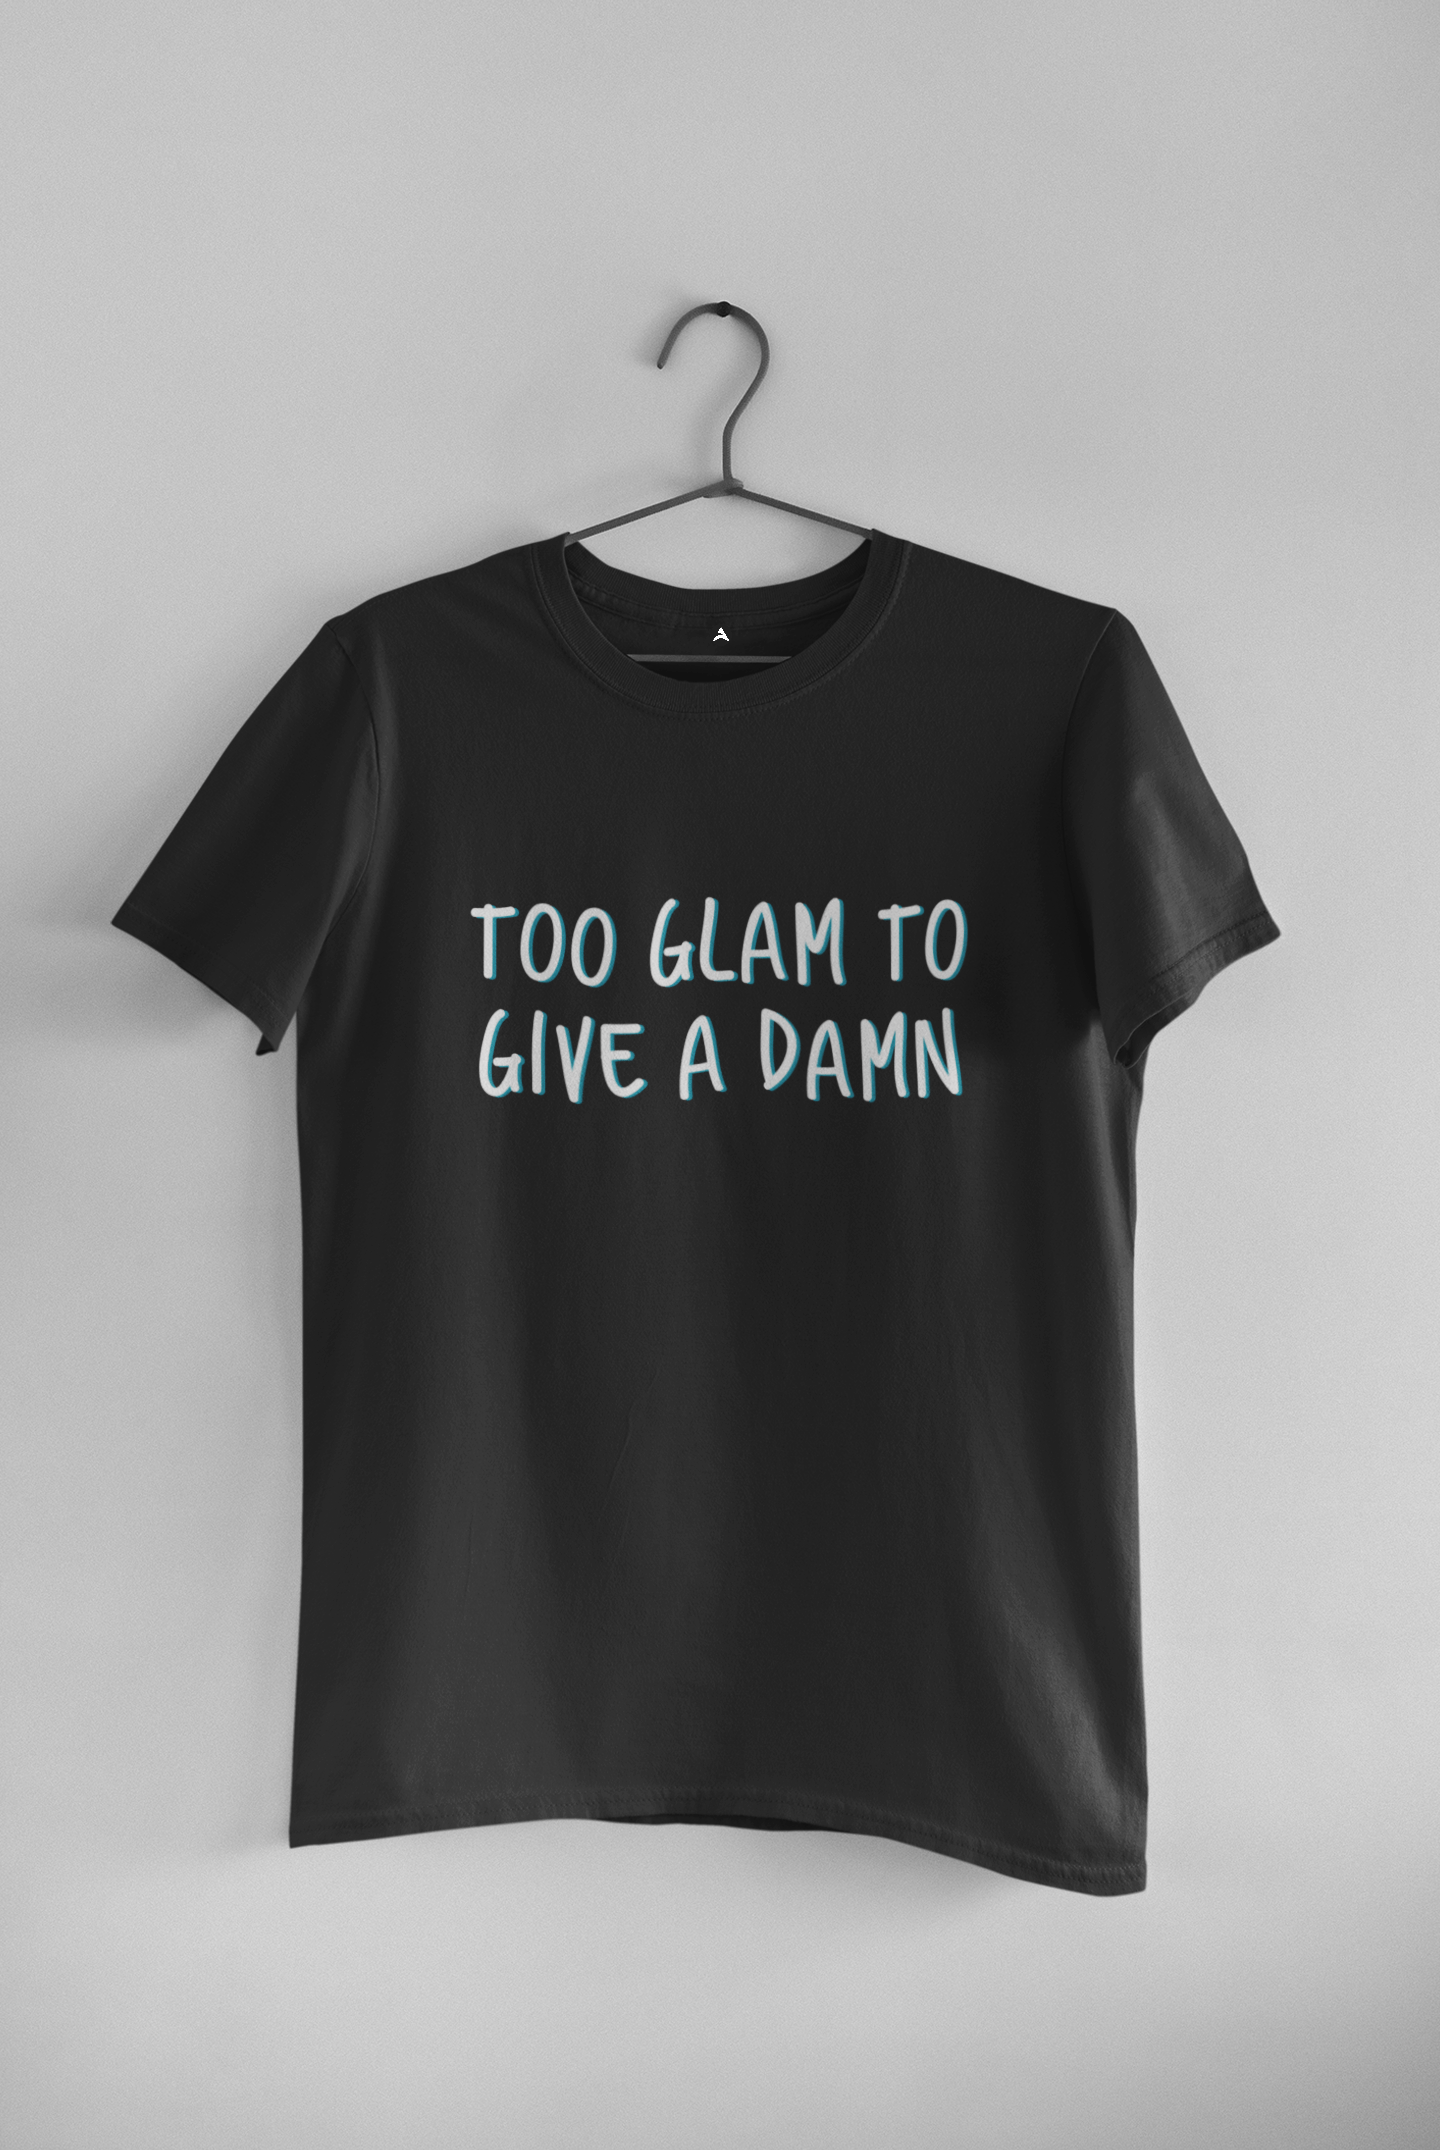 " TOO GLAM TO GIVE A DAMN " - HALF-SLEEVE T-SHIRTS BLACK